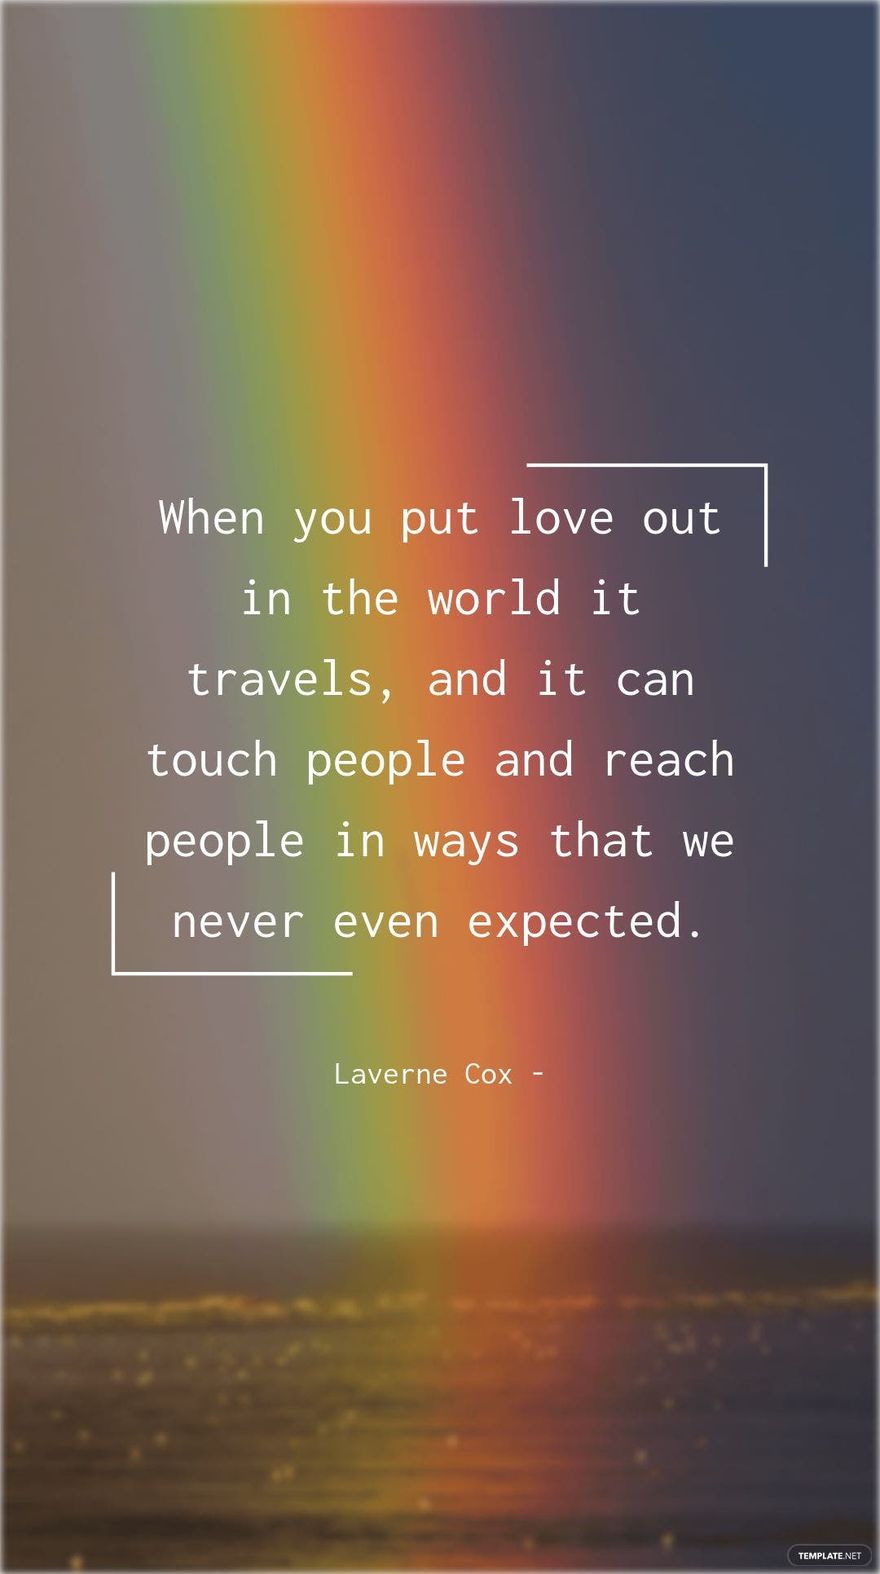 Free Laverne Cox - When you put love out in the world it travels, and it can touch people and reach people in ways that we never even expected.